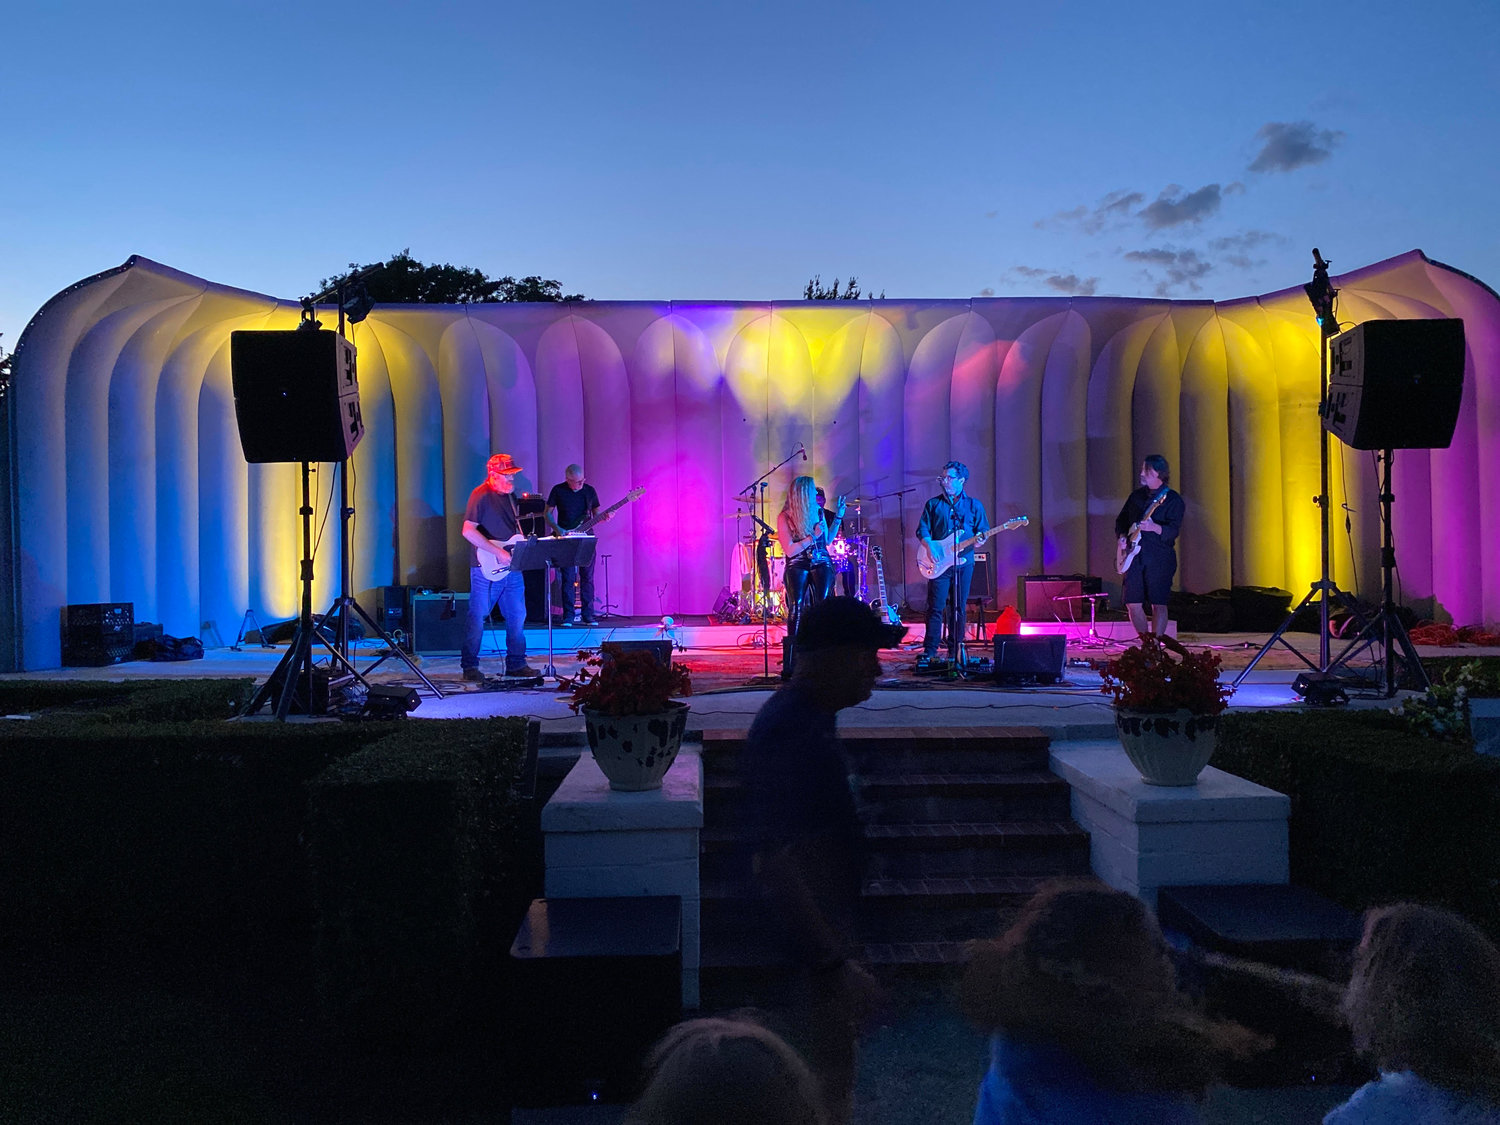 Bandshell concert featuring Gibbons a hit The Long Island Advance